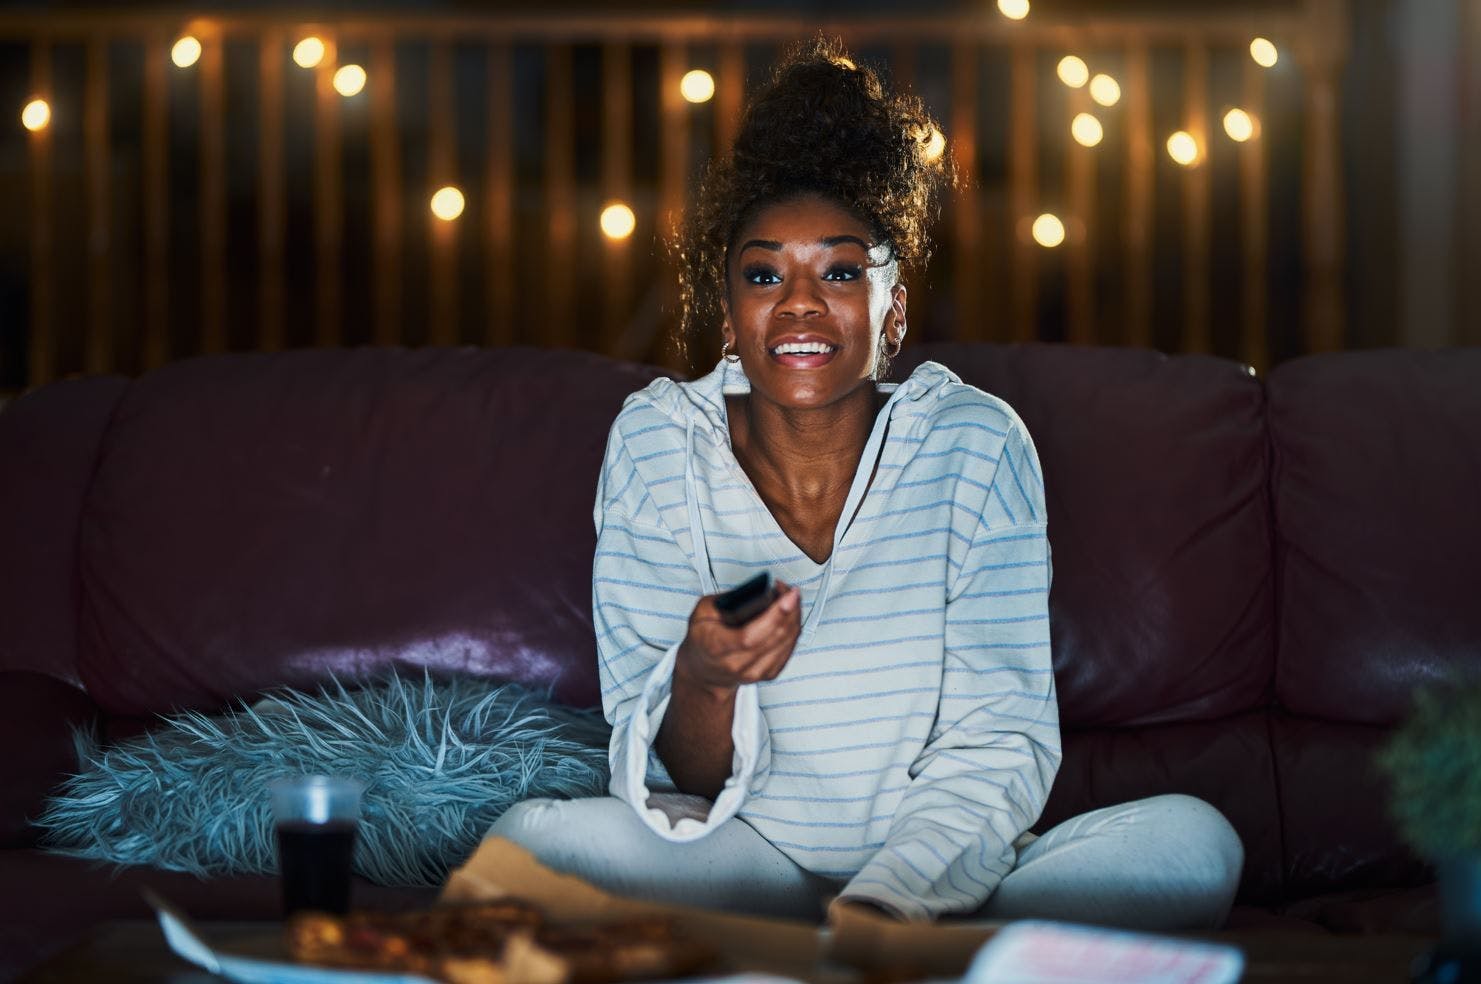 Evening Chronotype in Women Linked with Unhealthy Lifestyle, Increased Risk for Type 2 Diabetes / image credit  ©Joshua Resnick/stock.adobe.com